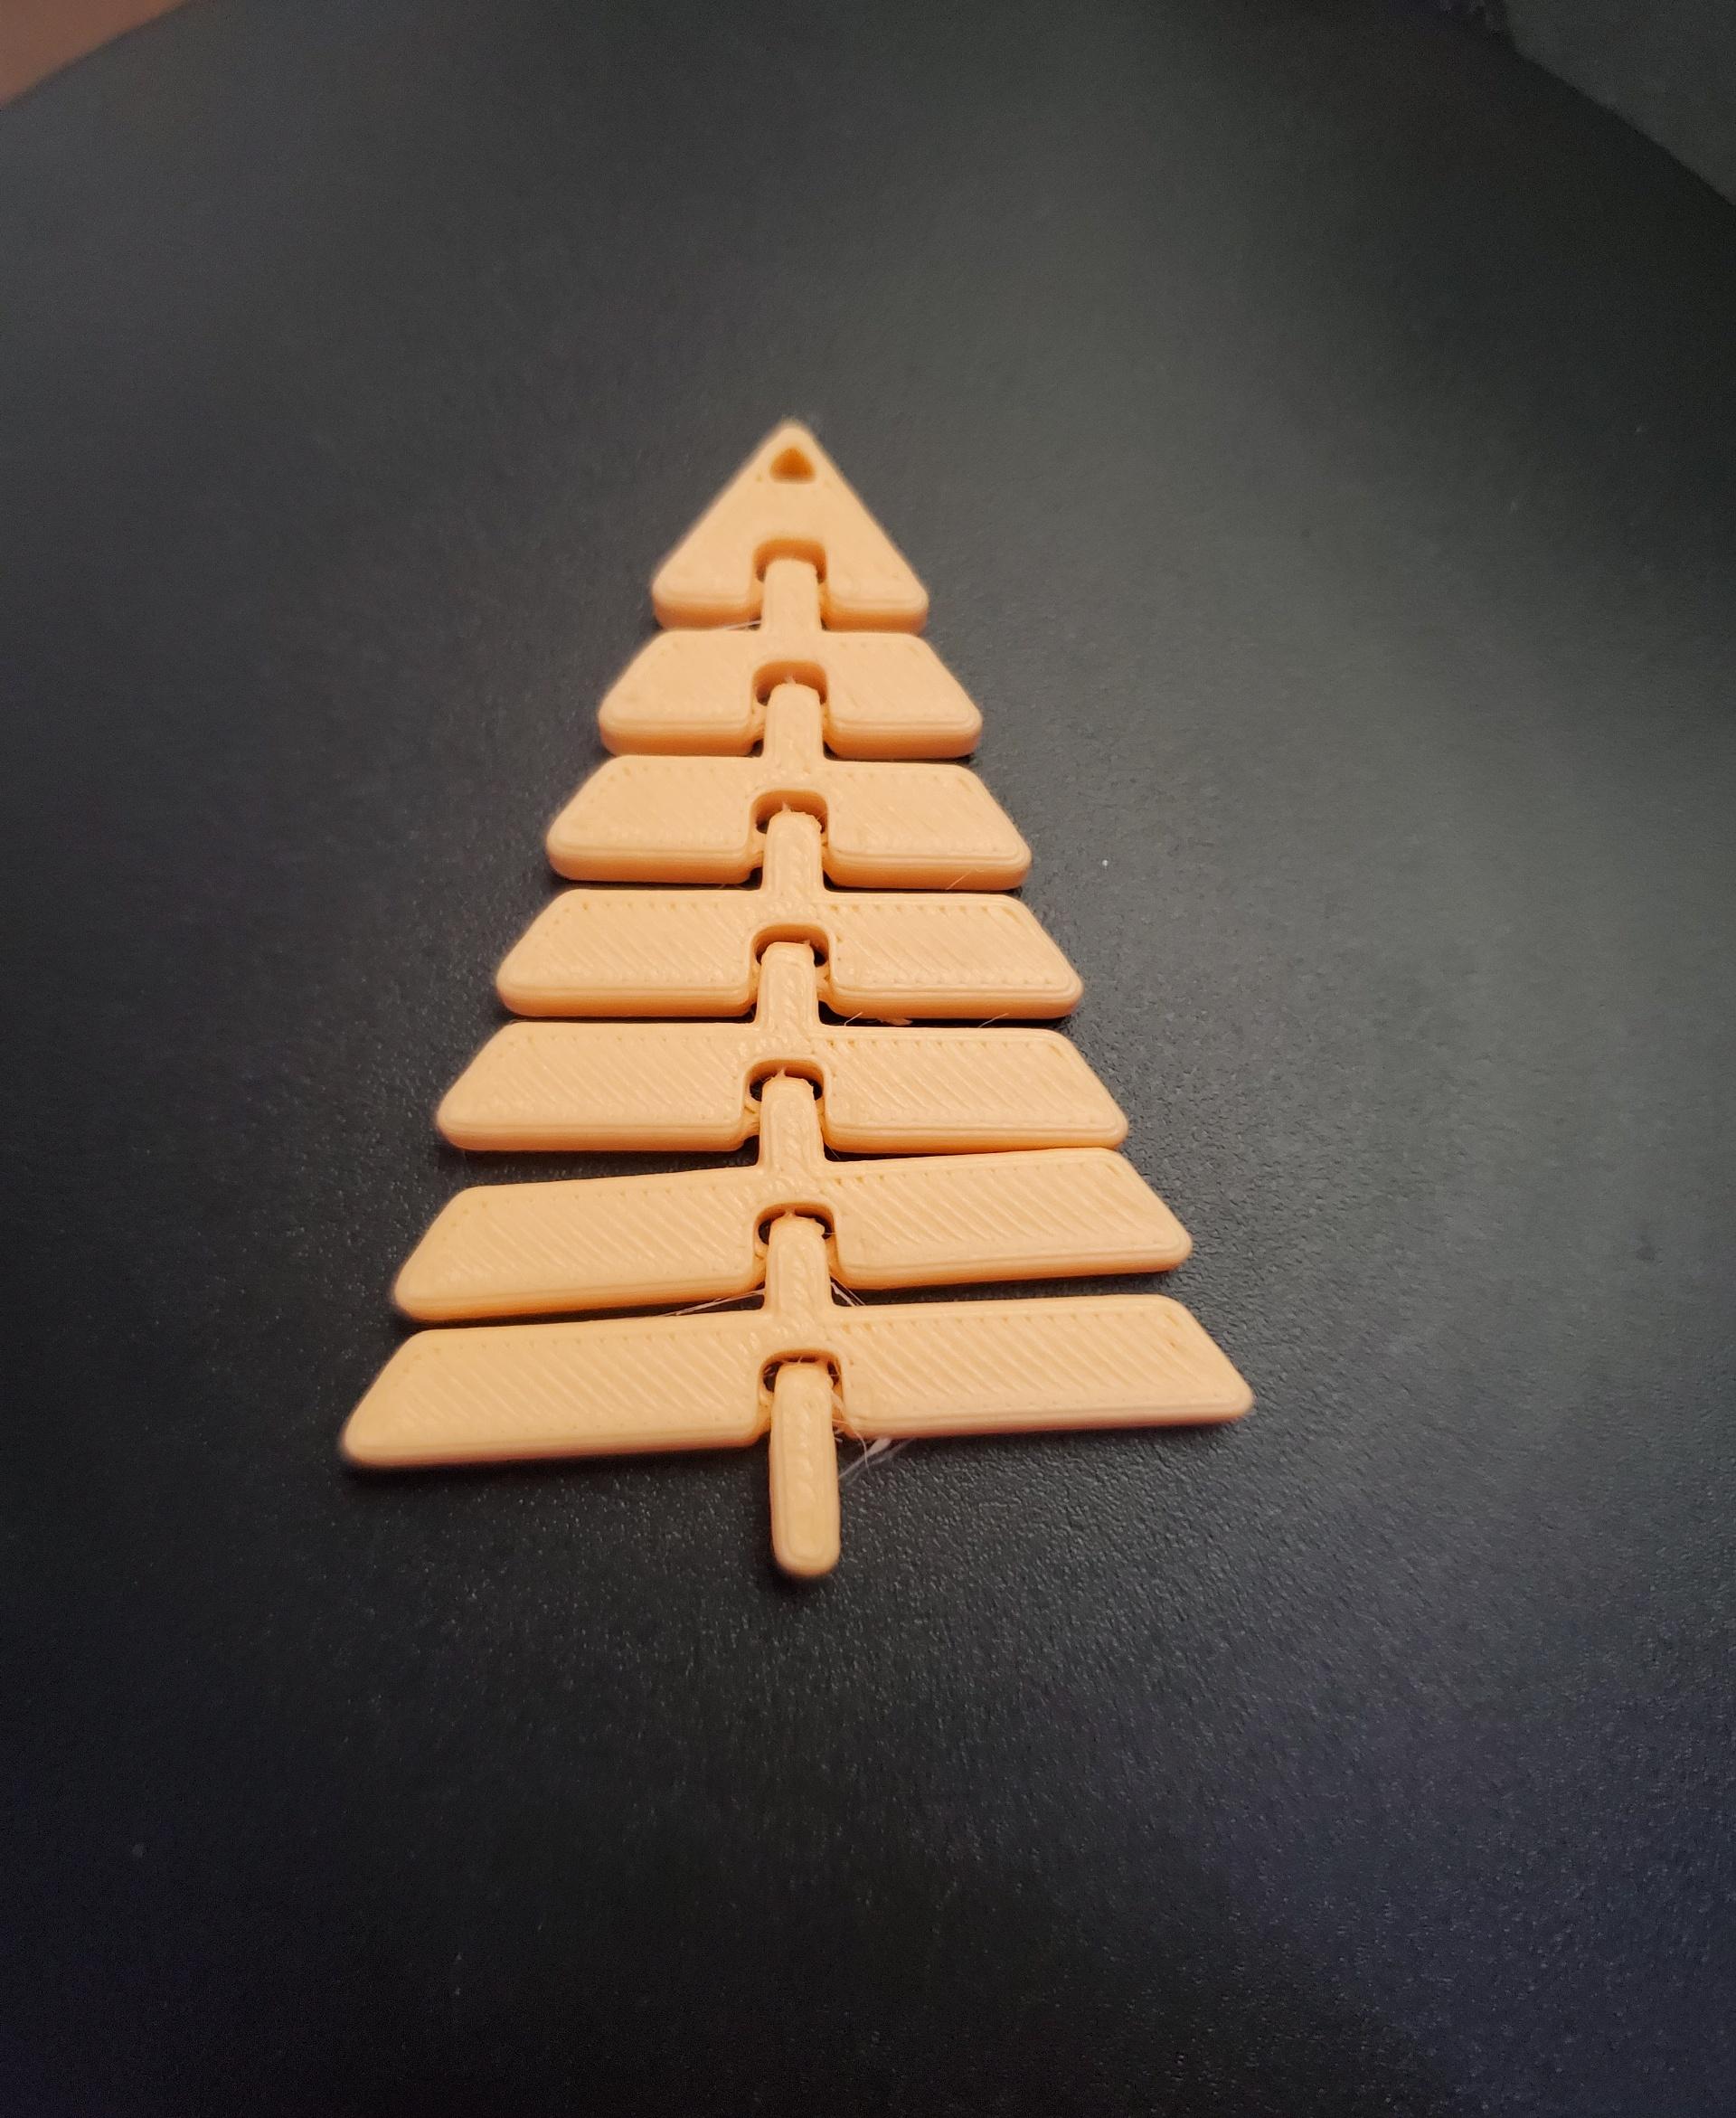 Articulated Christmas Tree Keychain - Print in place fidget toy - polyterra peach - 3d model